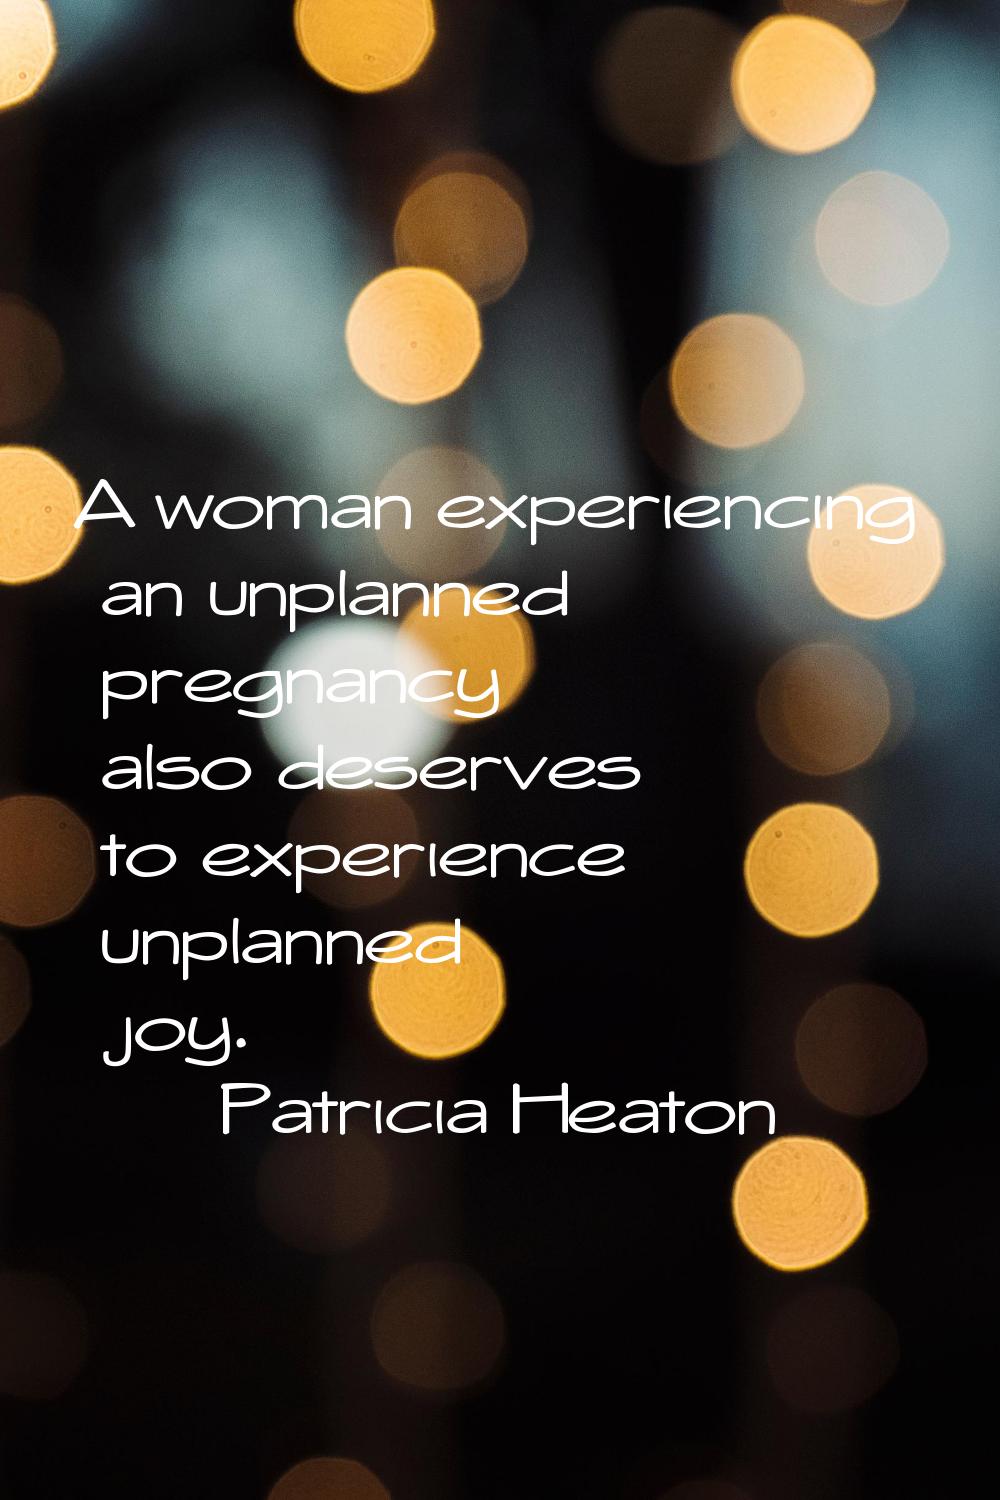 A woman experiencing an unplanned pregnancy also deserves to experience unplanned joy.